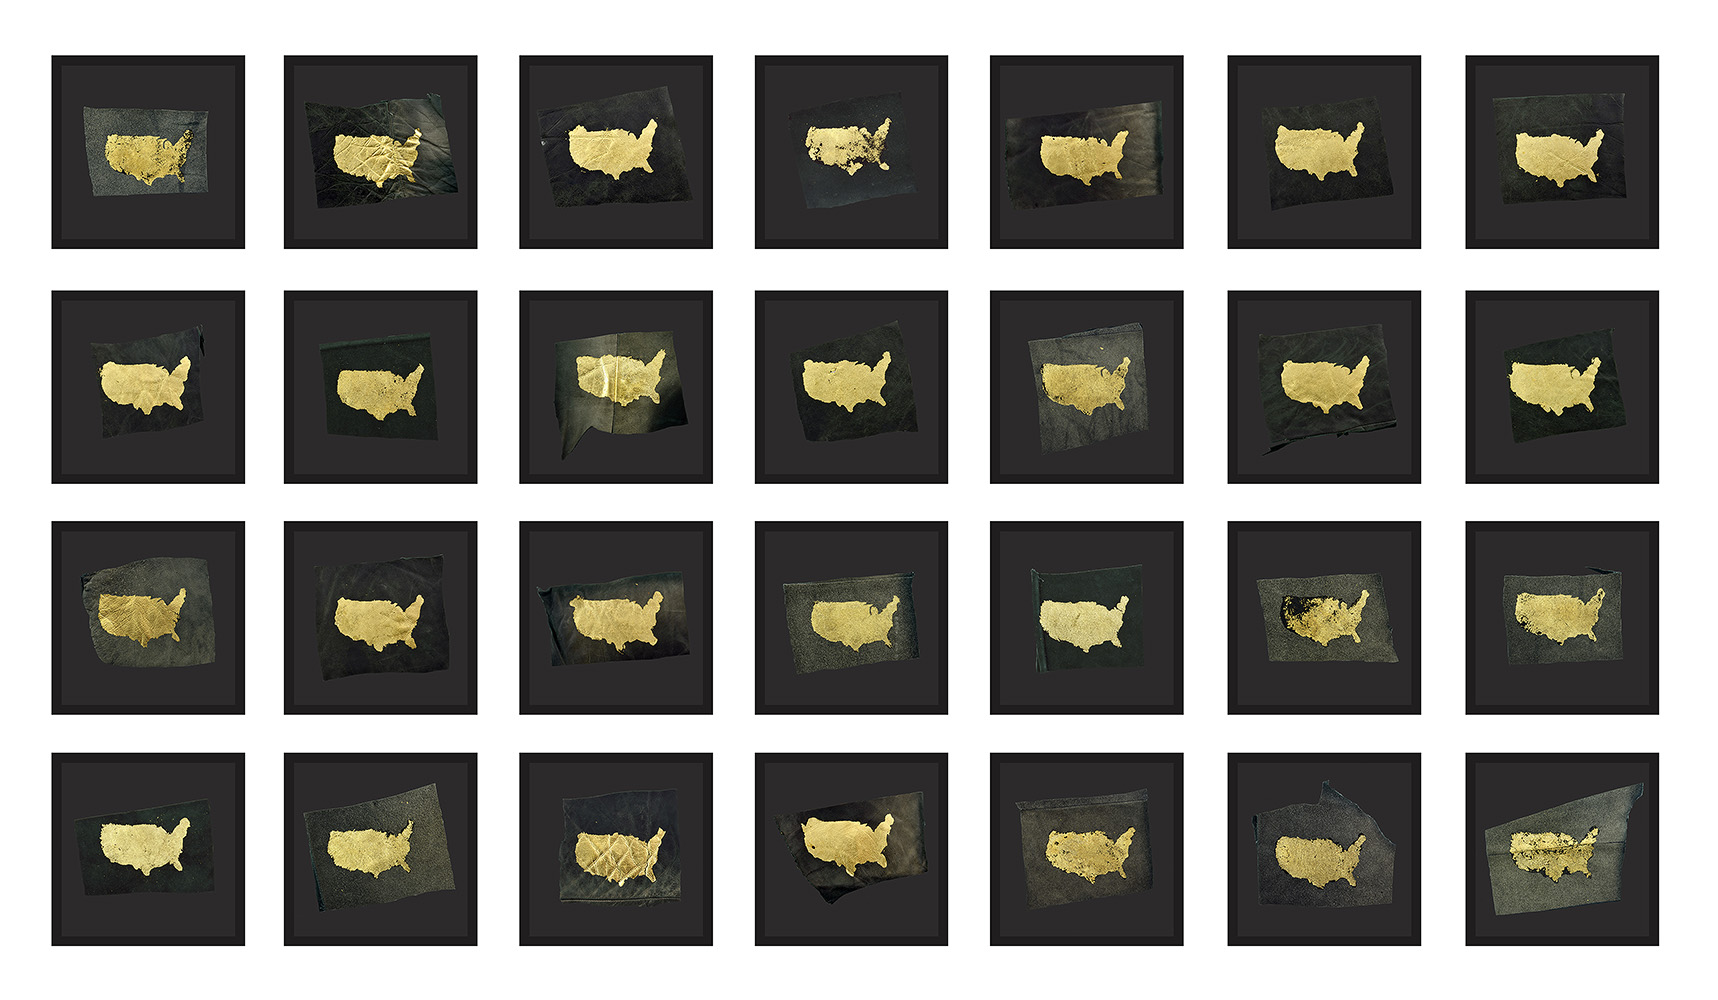 Sonya Clark - Care Taker, 2018, gold leaf, found leather, 28 pieces, dimensions vary, framed size: 11 by 11 inches each